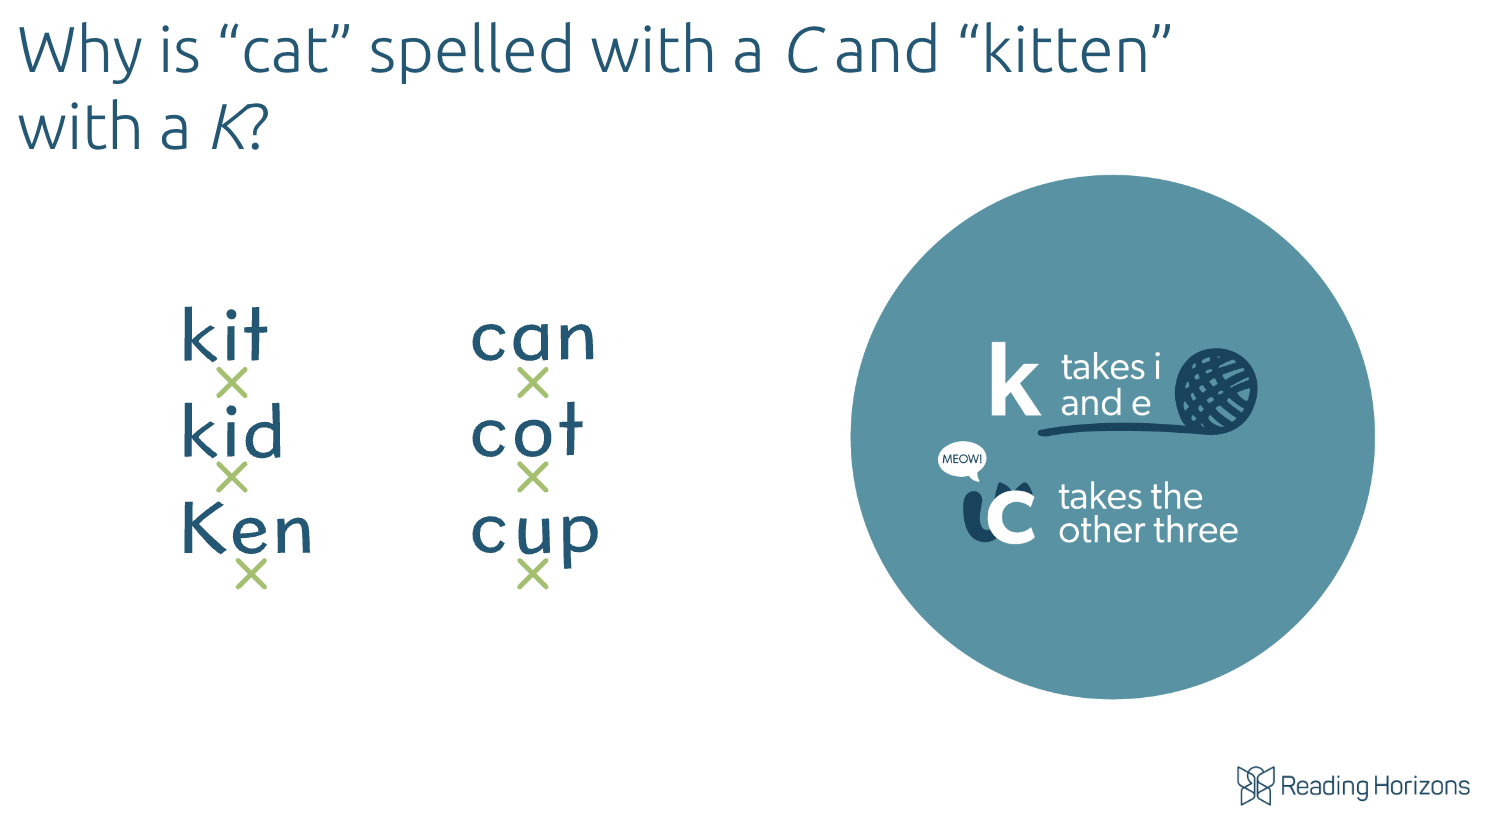 C/K Spelling Rule. K takes i and e. C takes the other three: a, o, and u.